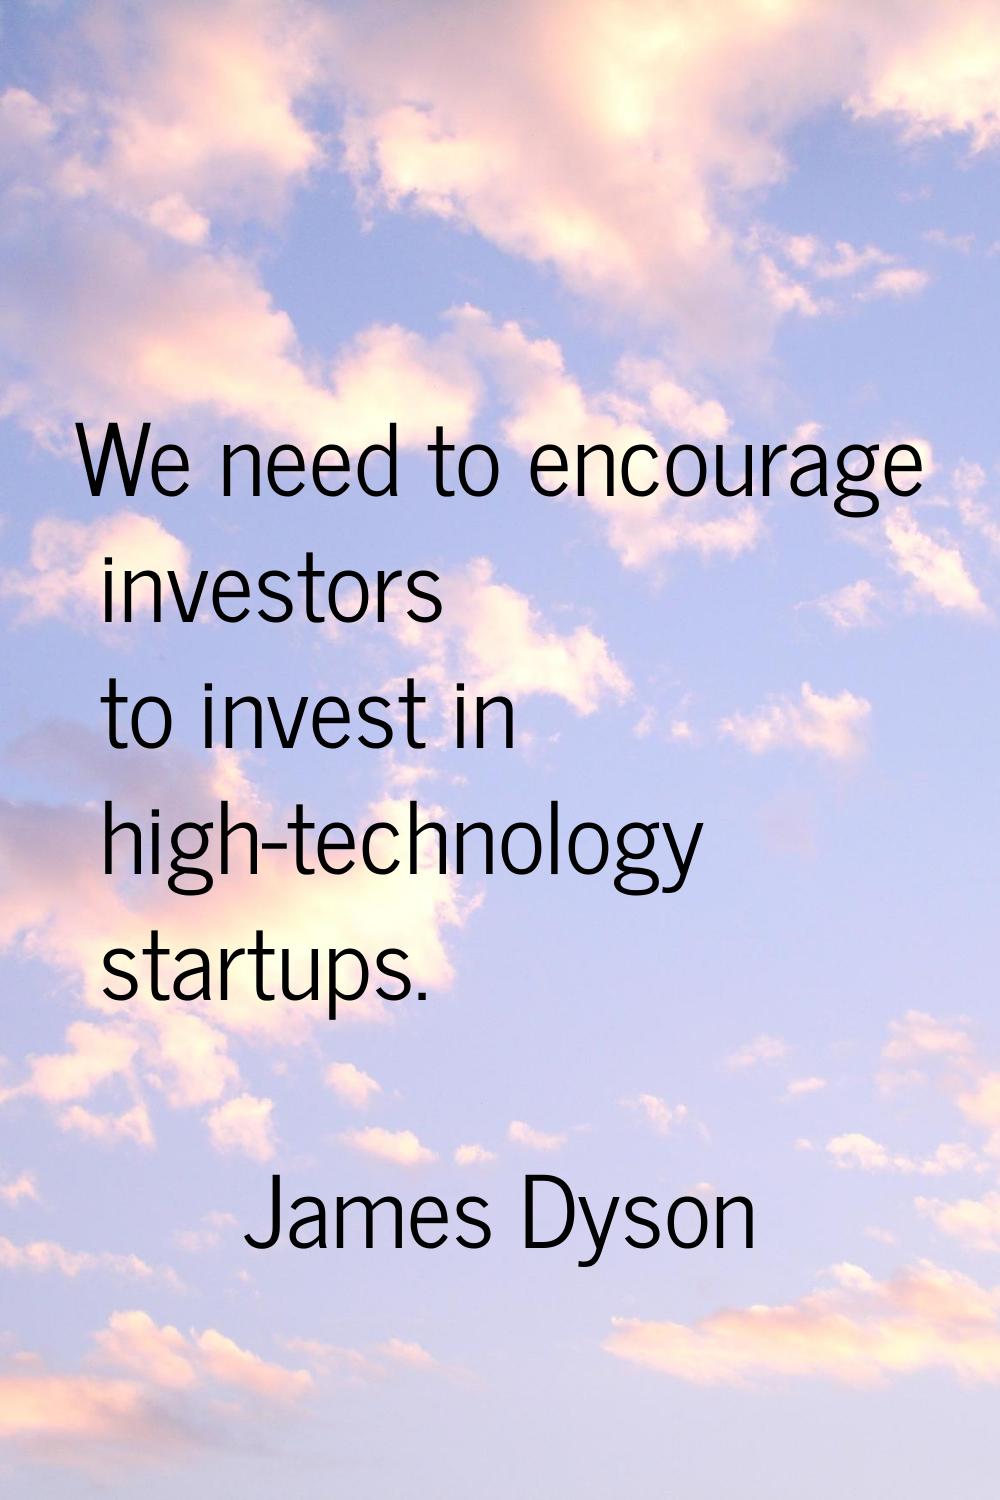 We need to encourage investors to invest in high-technology startups.